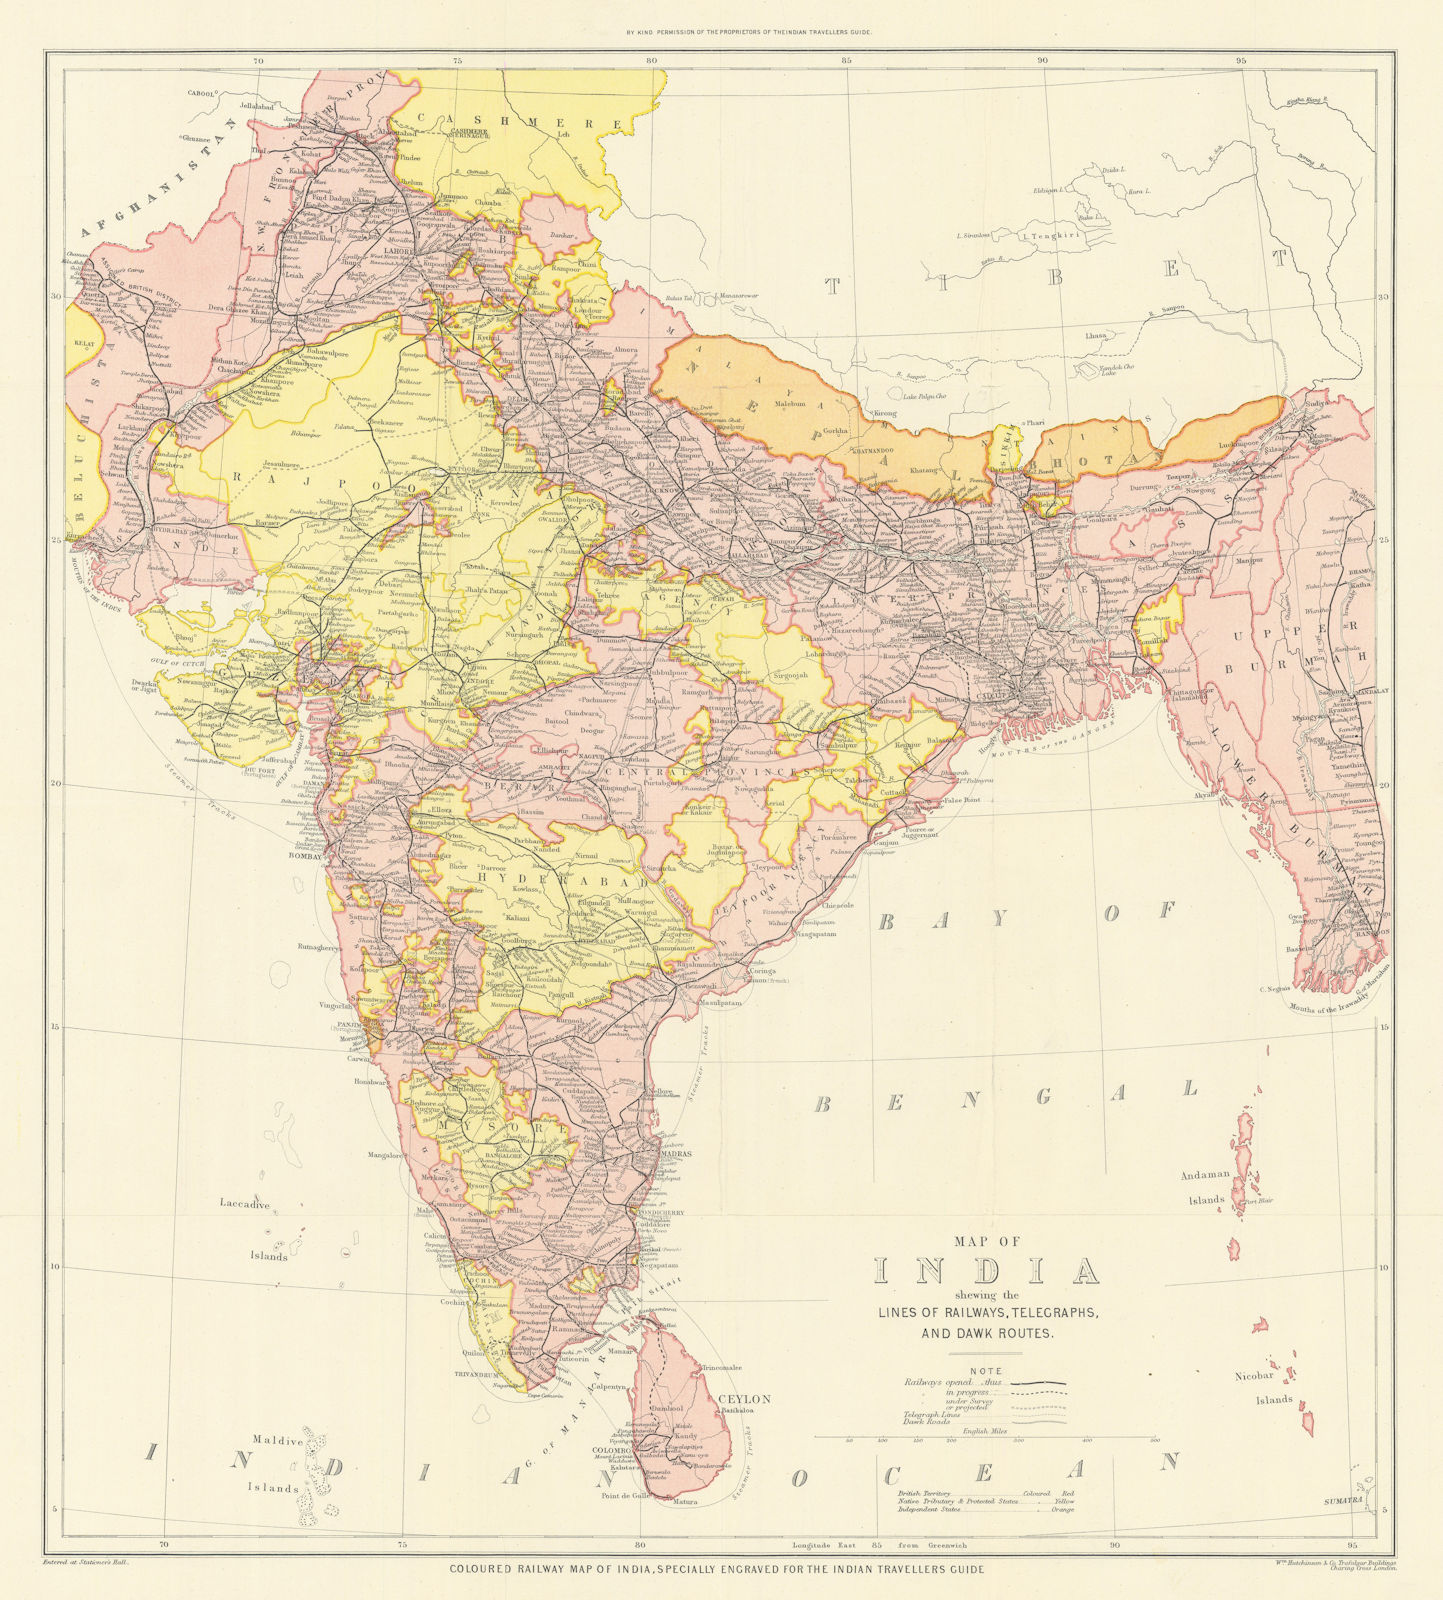 British India shewing the lines of Railways, Telegraphs & Dawk Routes 1905 map